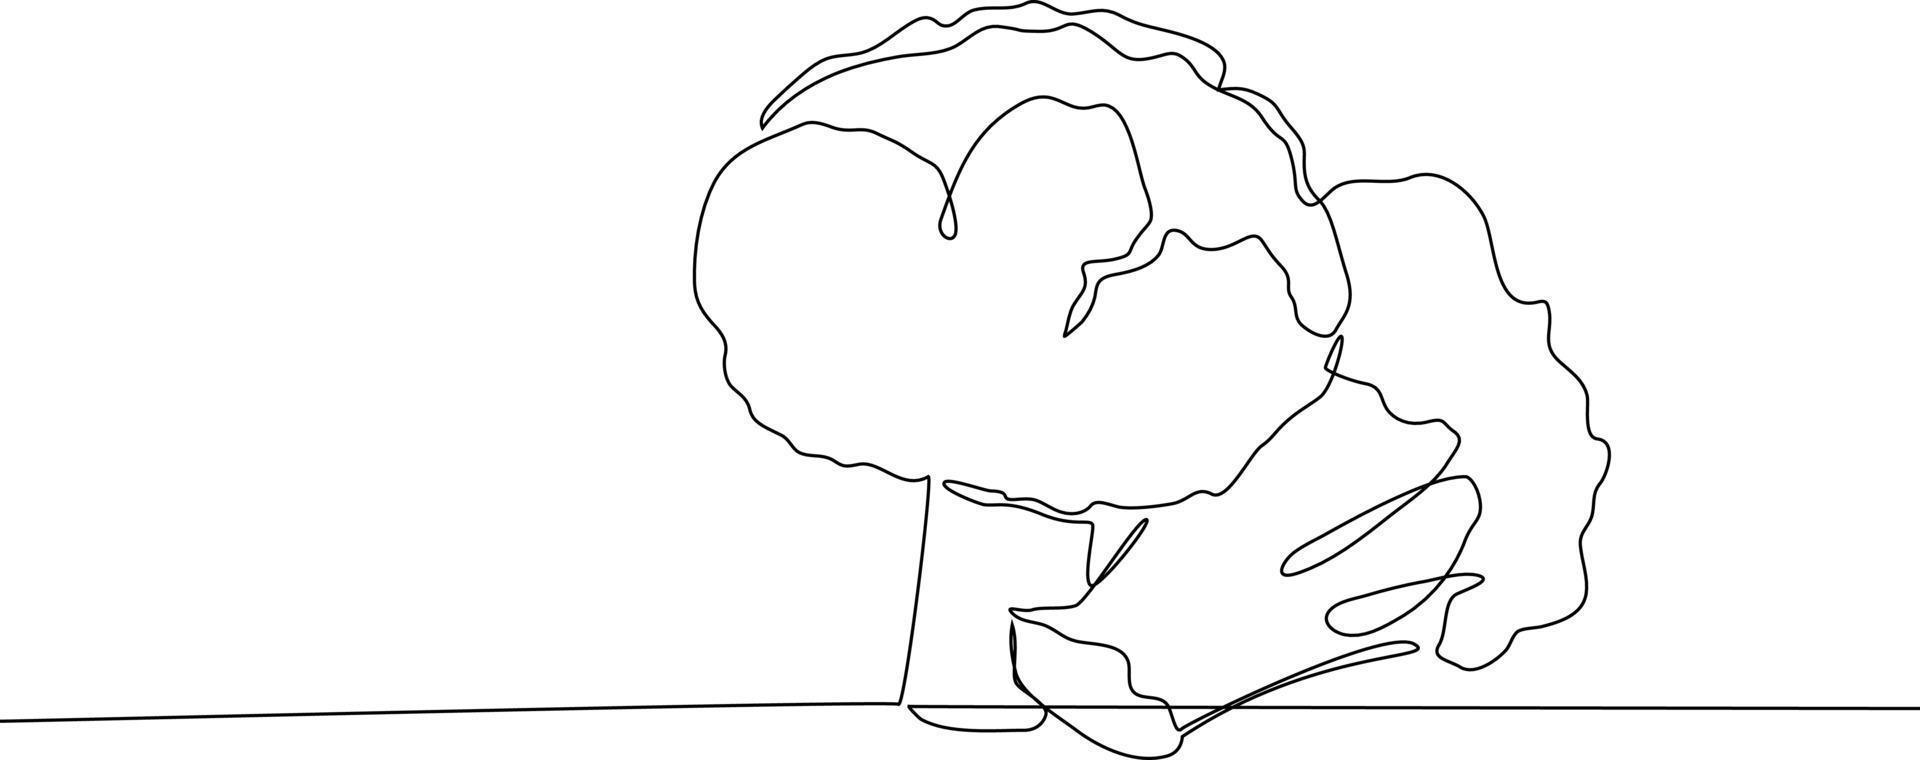 Single one-line drawing of two pieces of broccoli on the table. Herbs and spices concept. Continuous line drawing design graphic vector illustration.